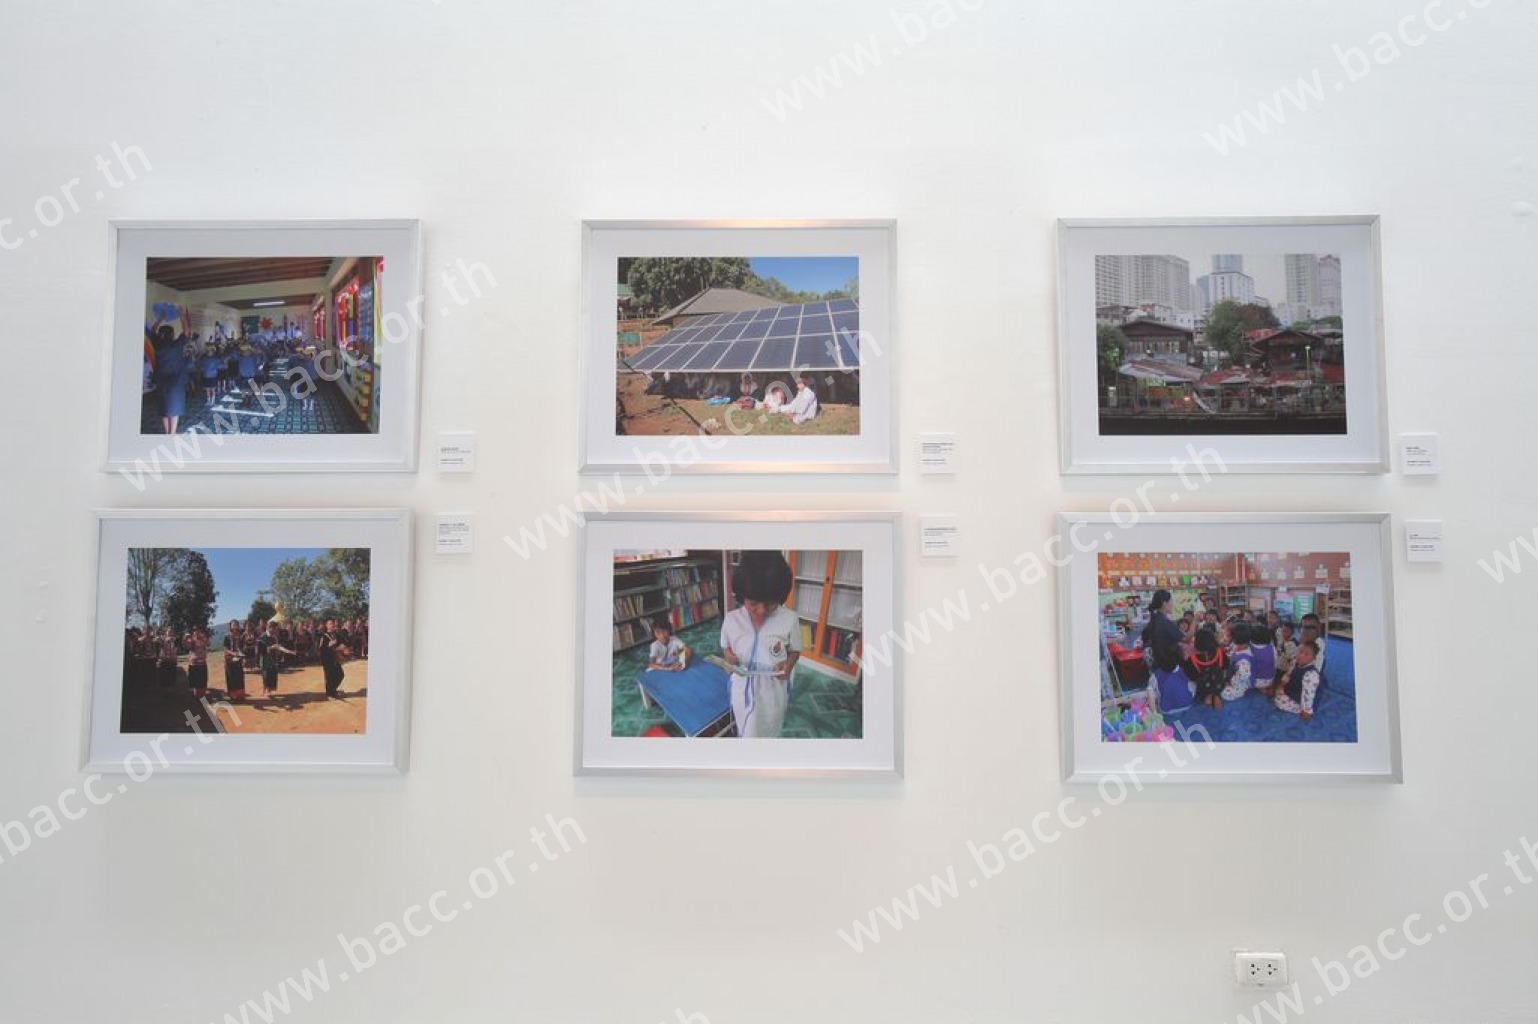 Photographs Exhibition by H.R.H. Princess Maha Chakri Sirindhorn “Camera in Motion: a Global Perspective”